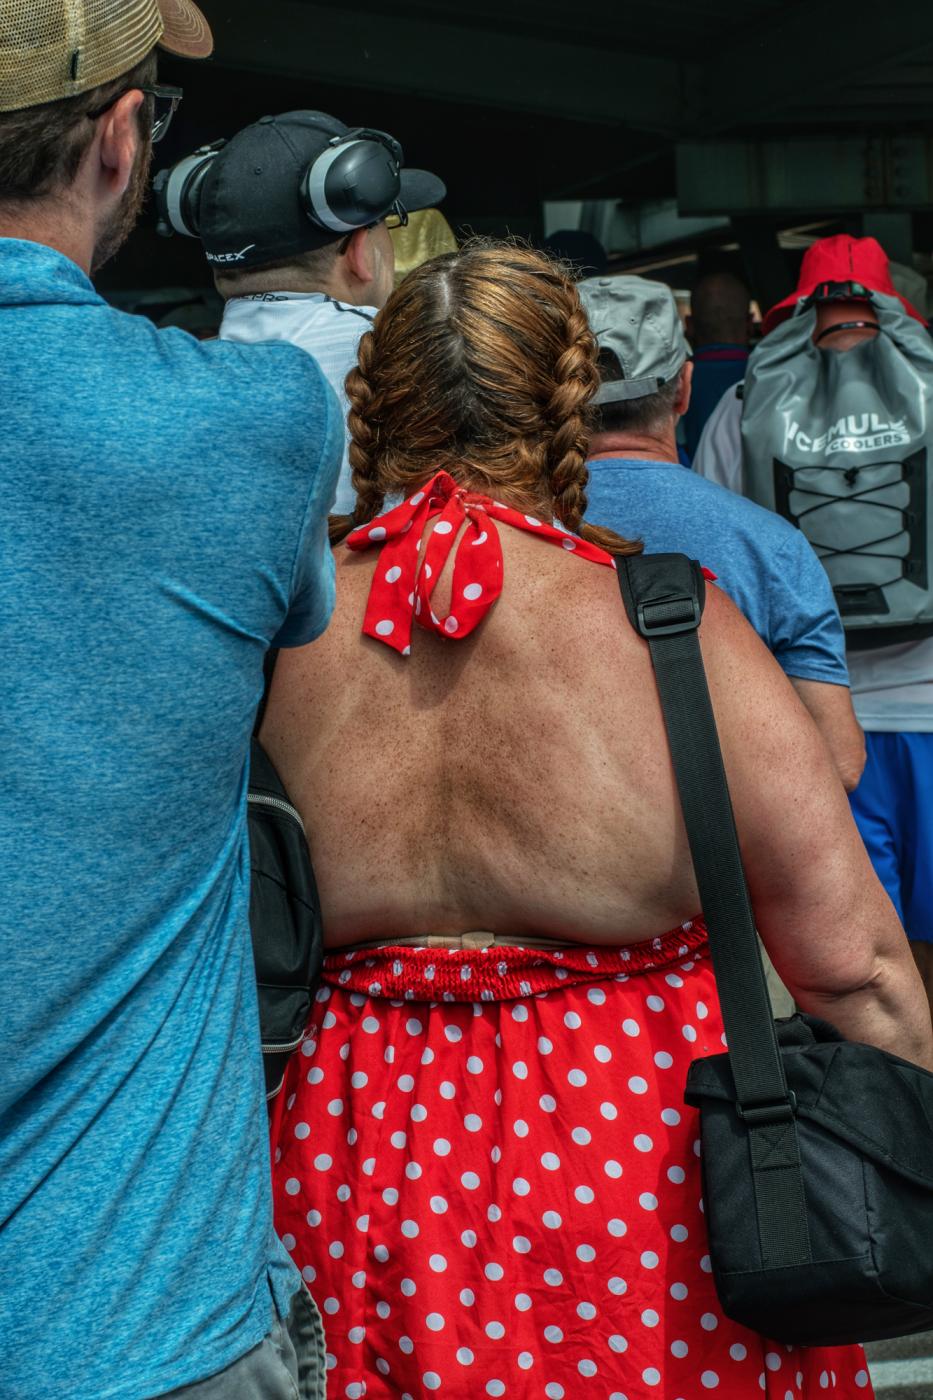 Queuing. Race fans carry cooler...Photo by Kathryn Coers Rossman.